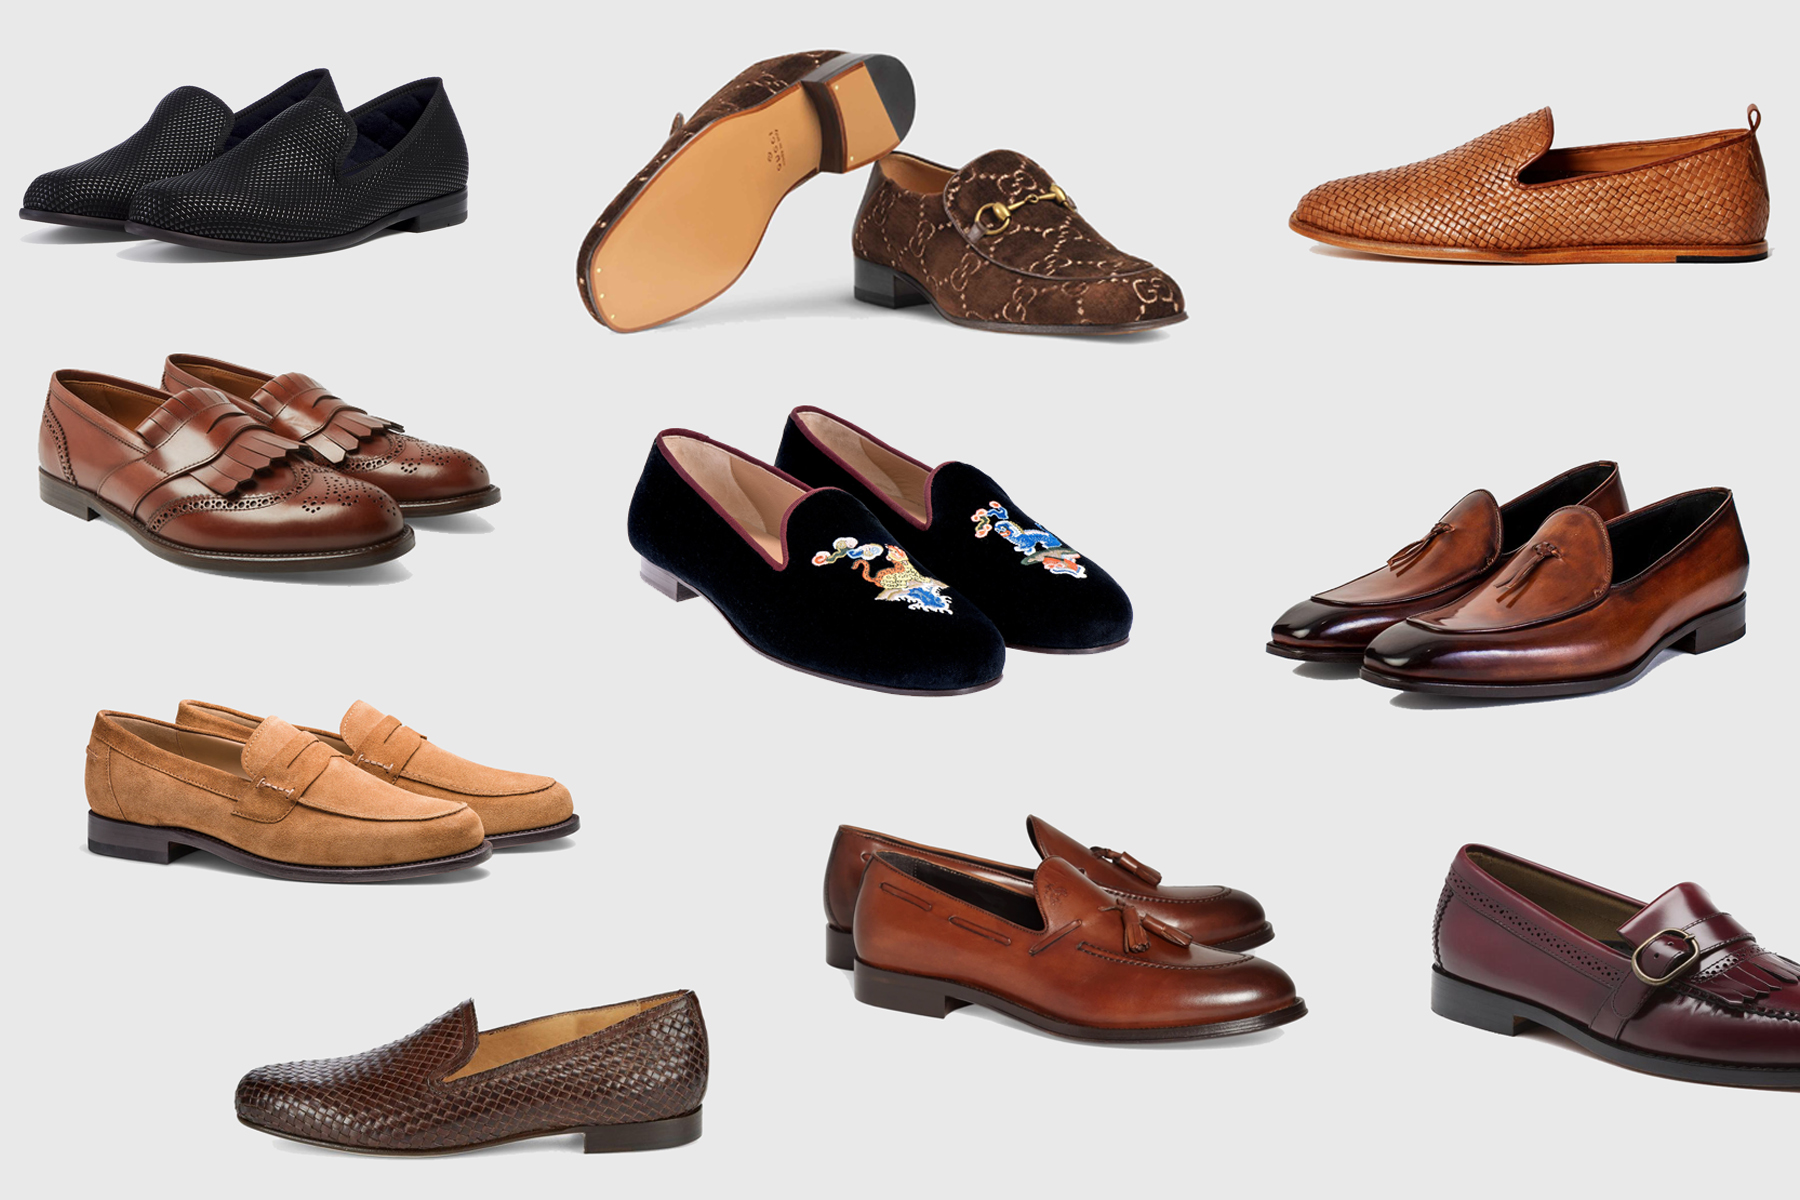 The 7 Different Styles of Loafer 